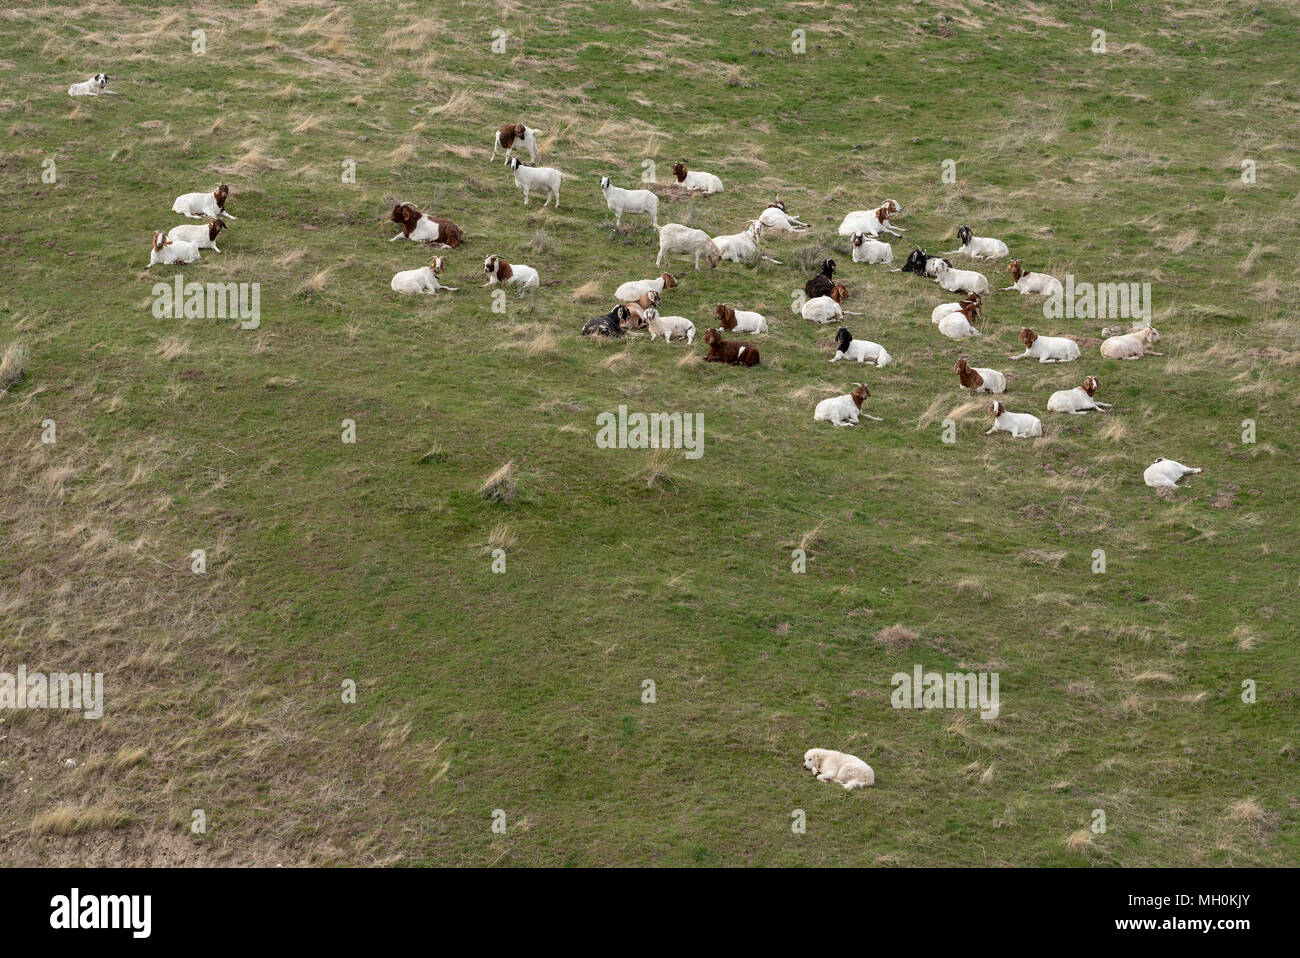 Guard dogs with a herd of goats on on a farm in Southeast Washington. Stock Photo